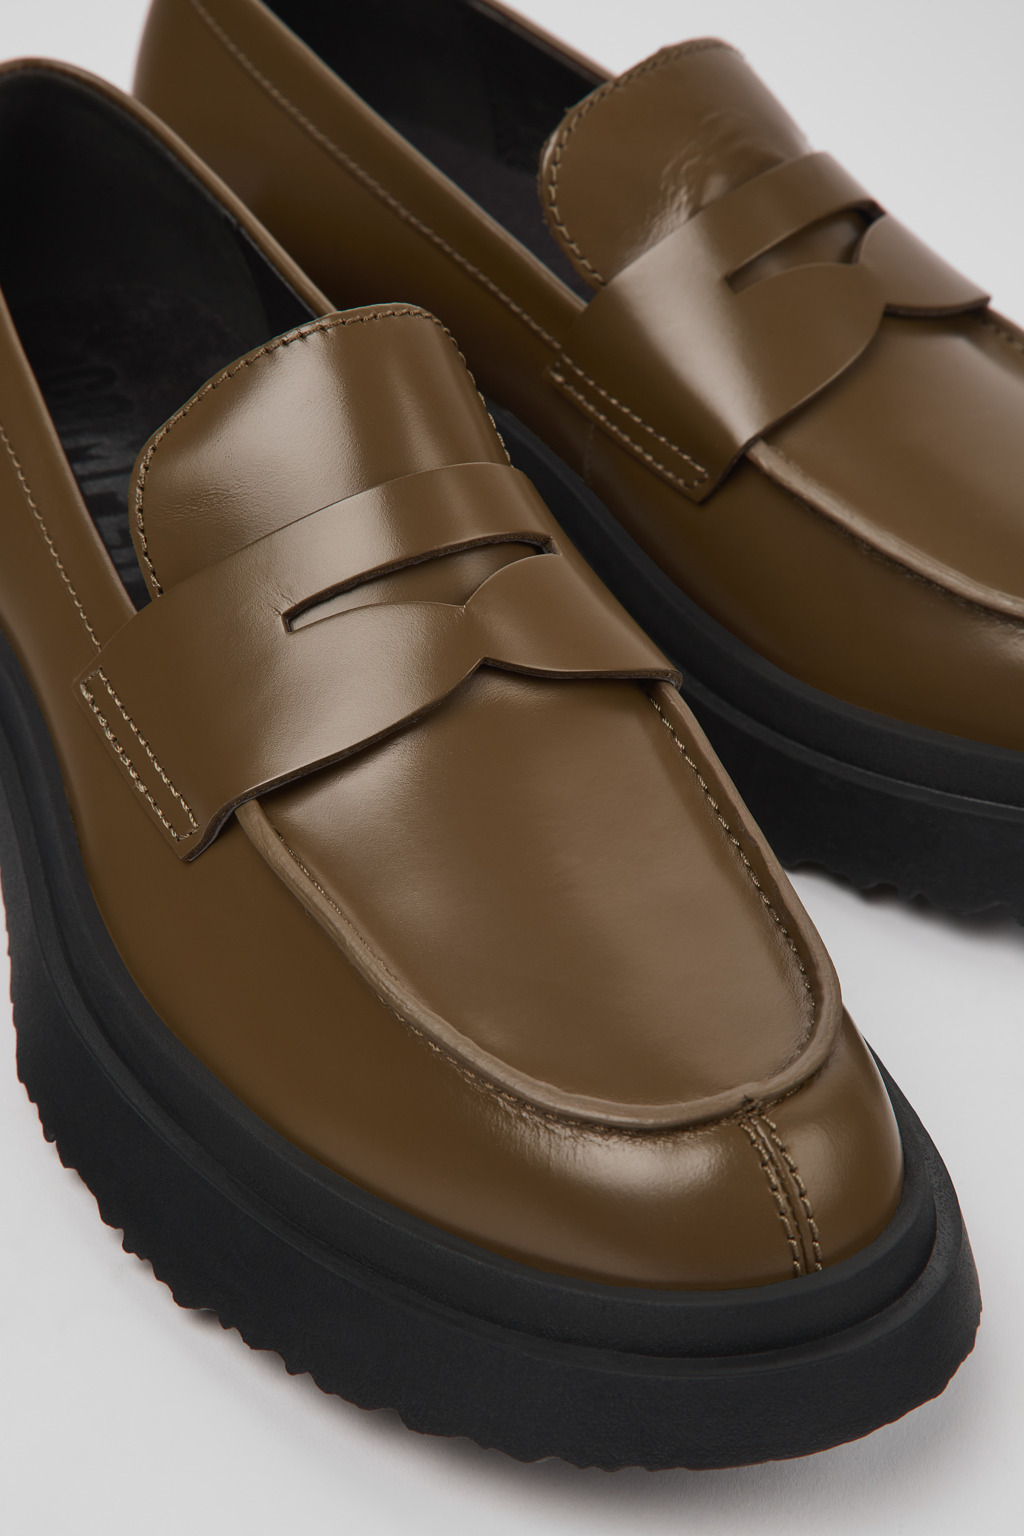 Walden Brown Loafers for Women - Camper Shoes